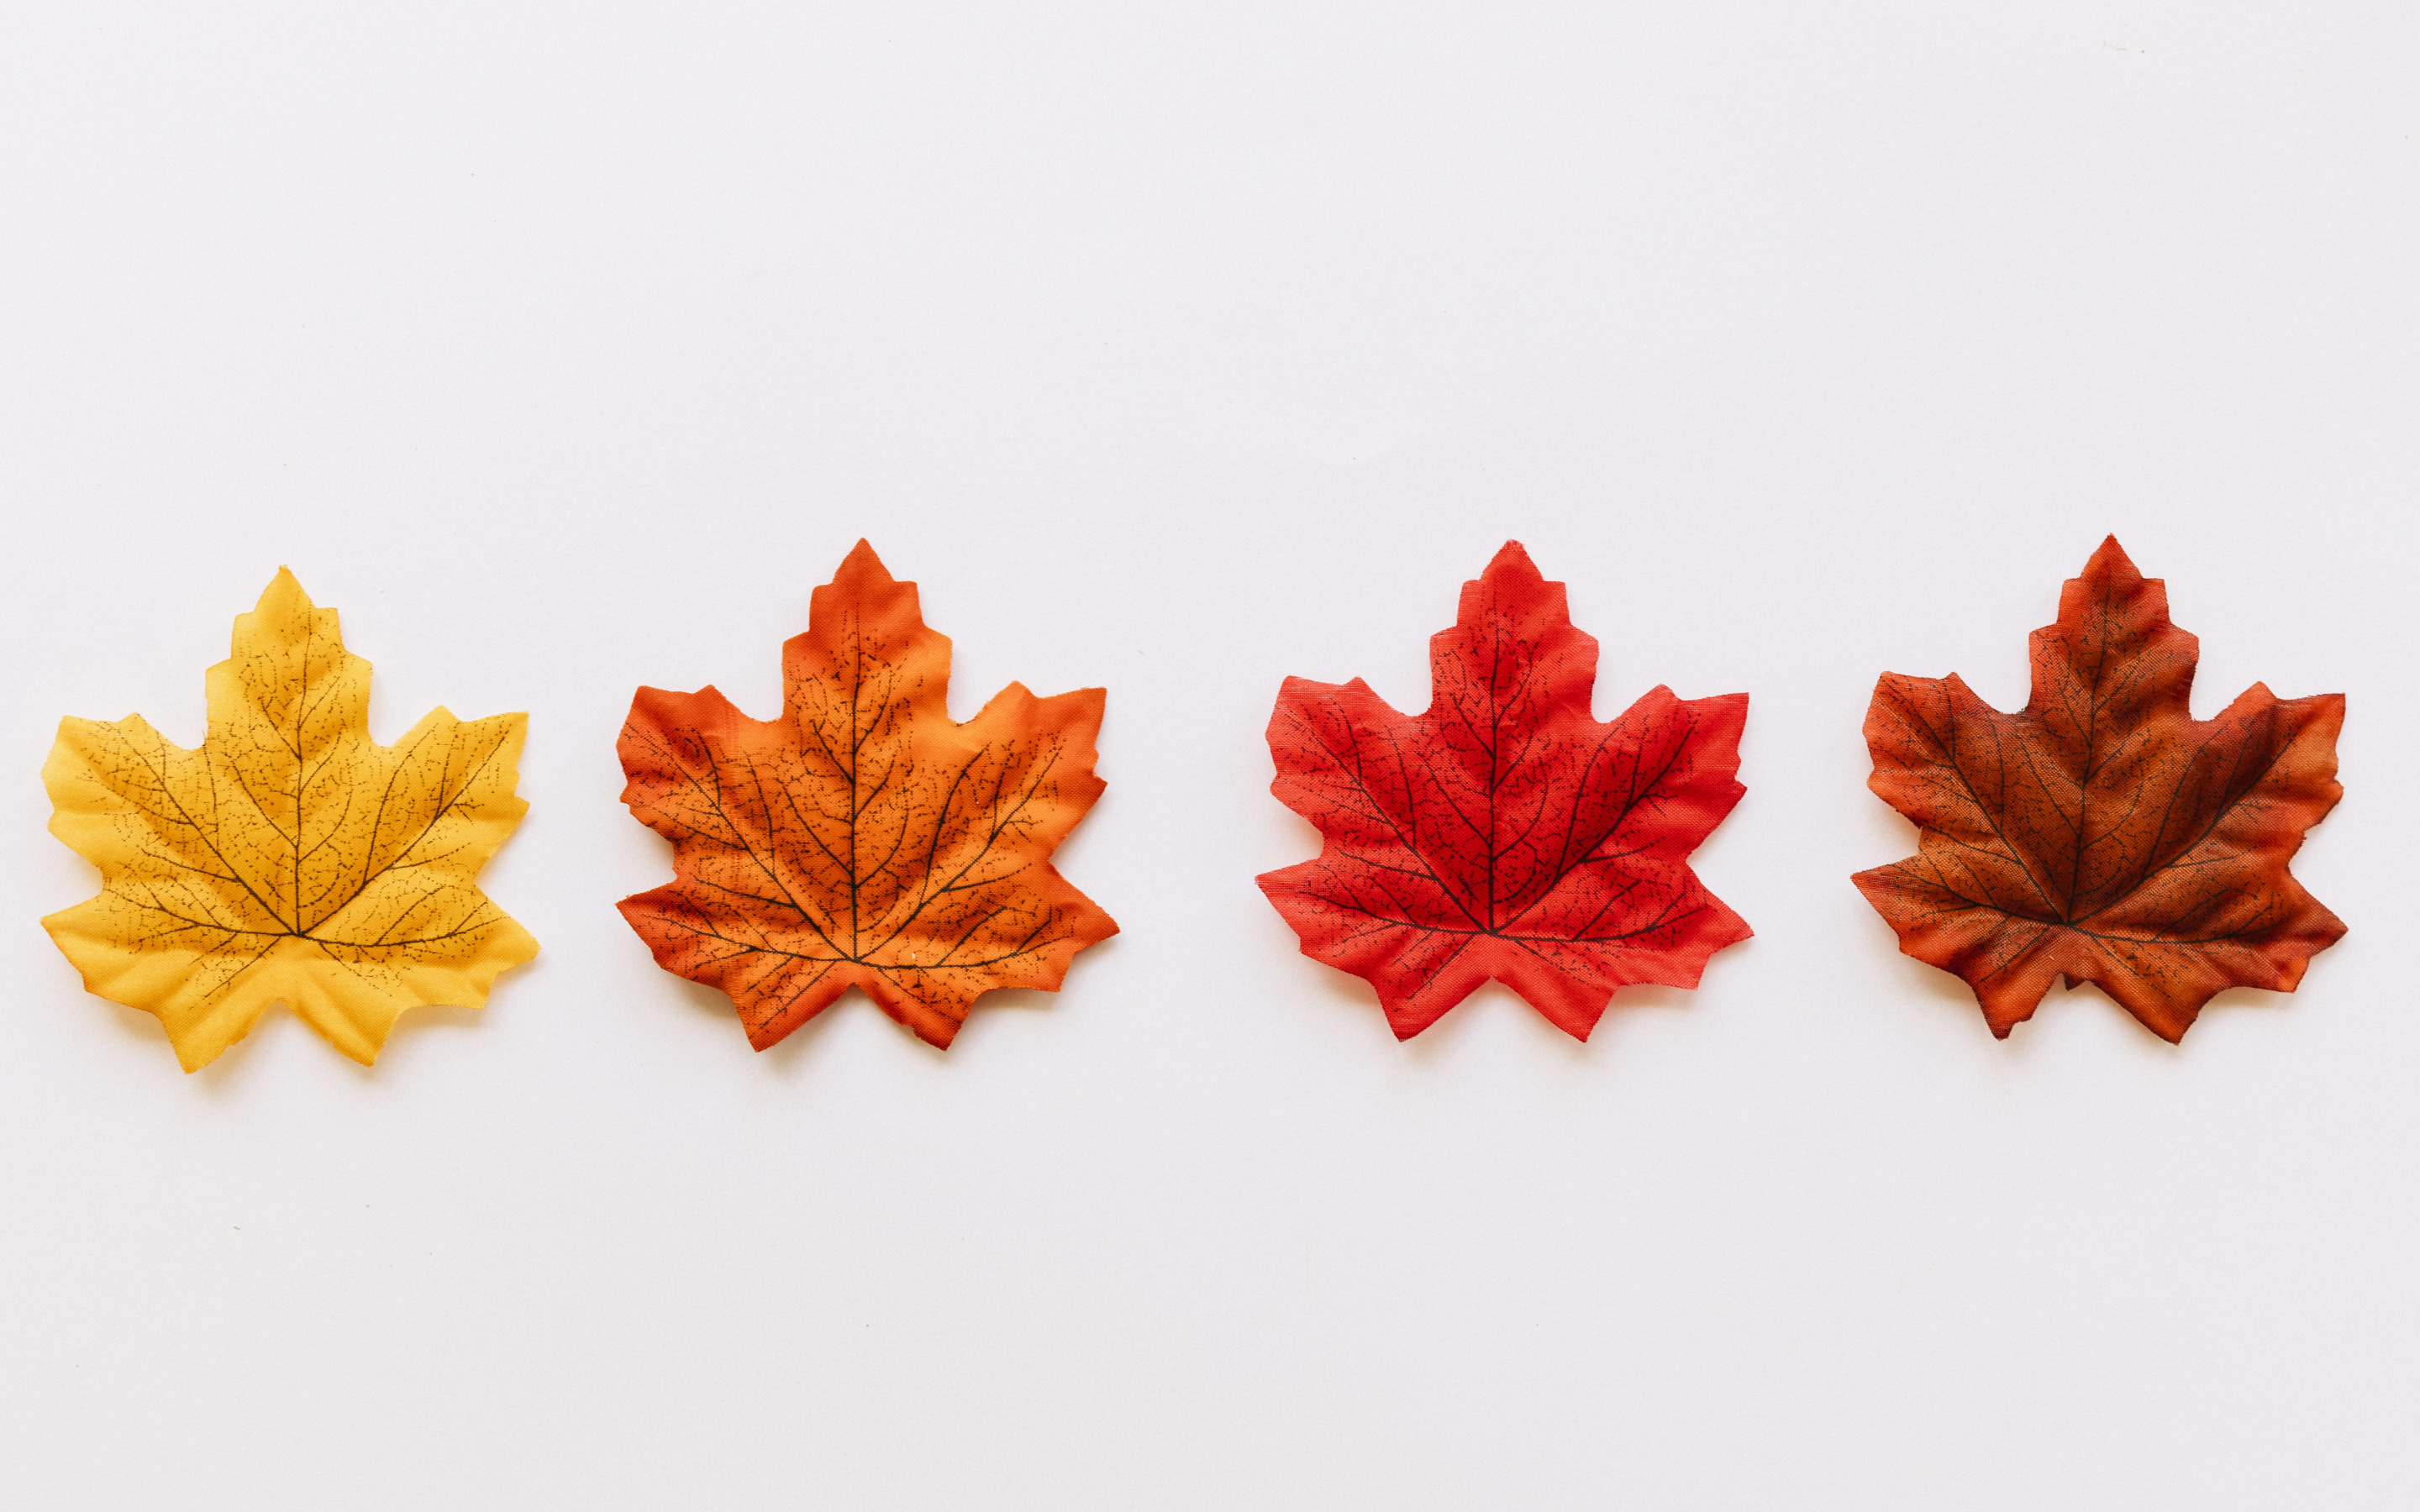 White Background Digital Art Texture Leaves Maple Leaves Fall Fallen Leaves Minimalism Textured 2880x1800